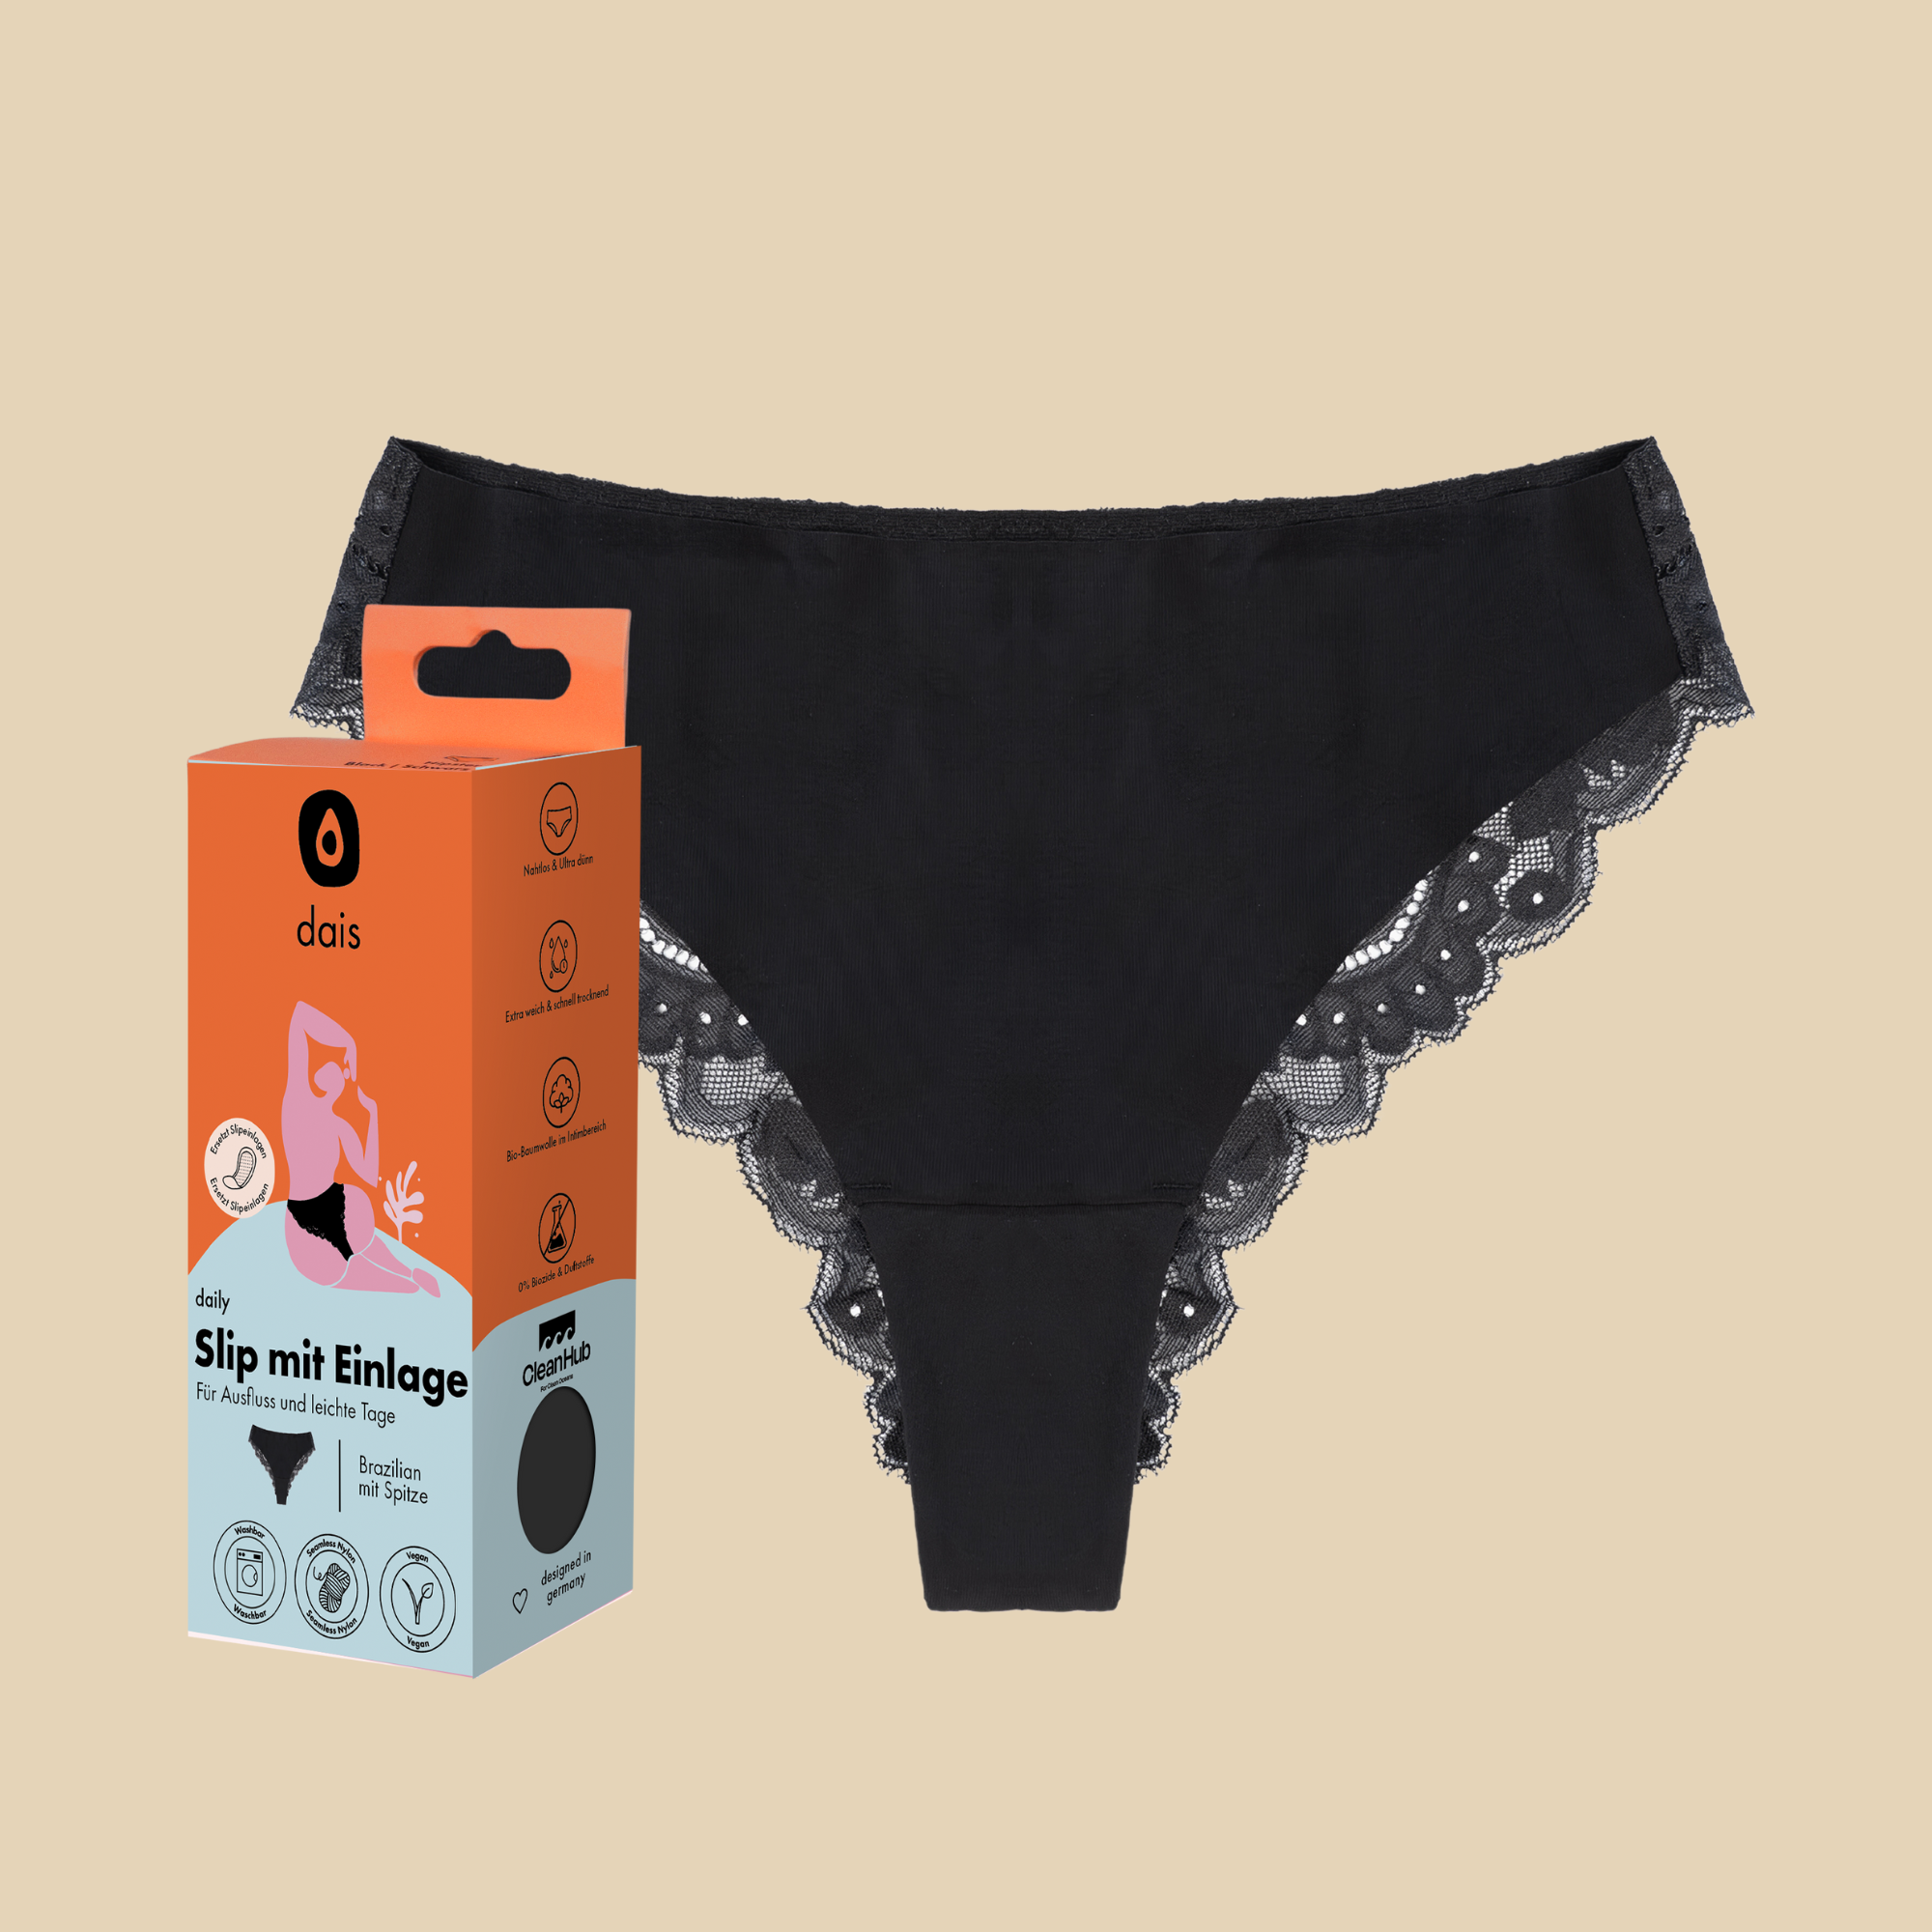 dais daily underwear in brazilian cut with lace in black colour. Product shown with modern packaging.